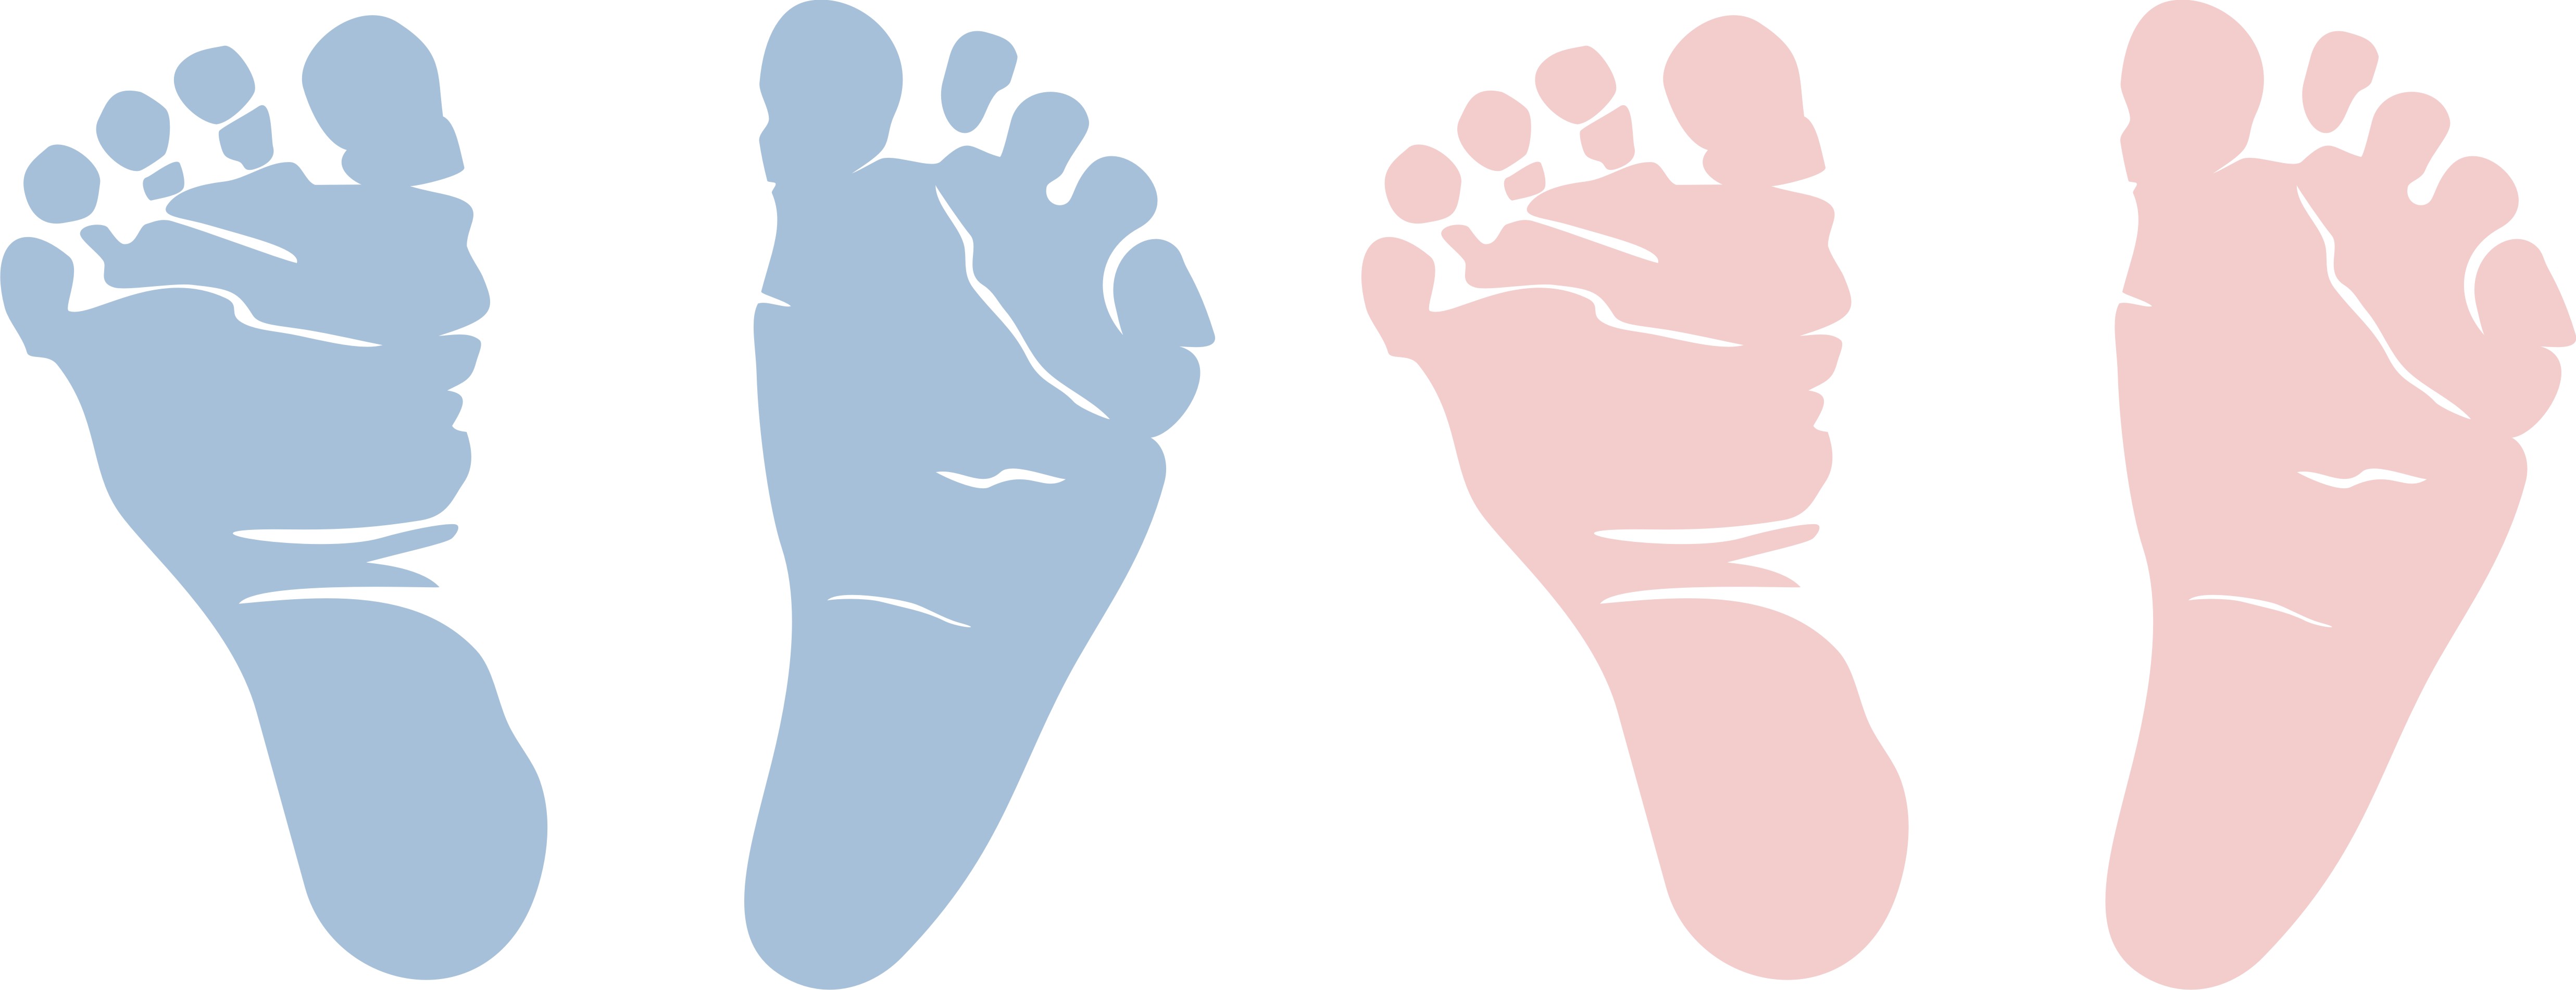 Baby Feet Png Free - Pngkit selects 59 hd baby feet png images for free ...